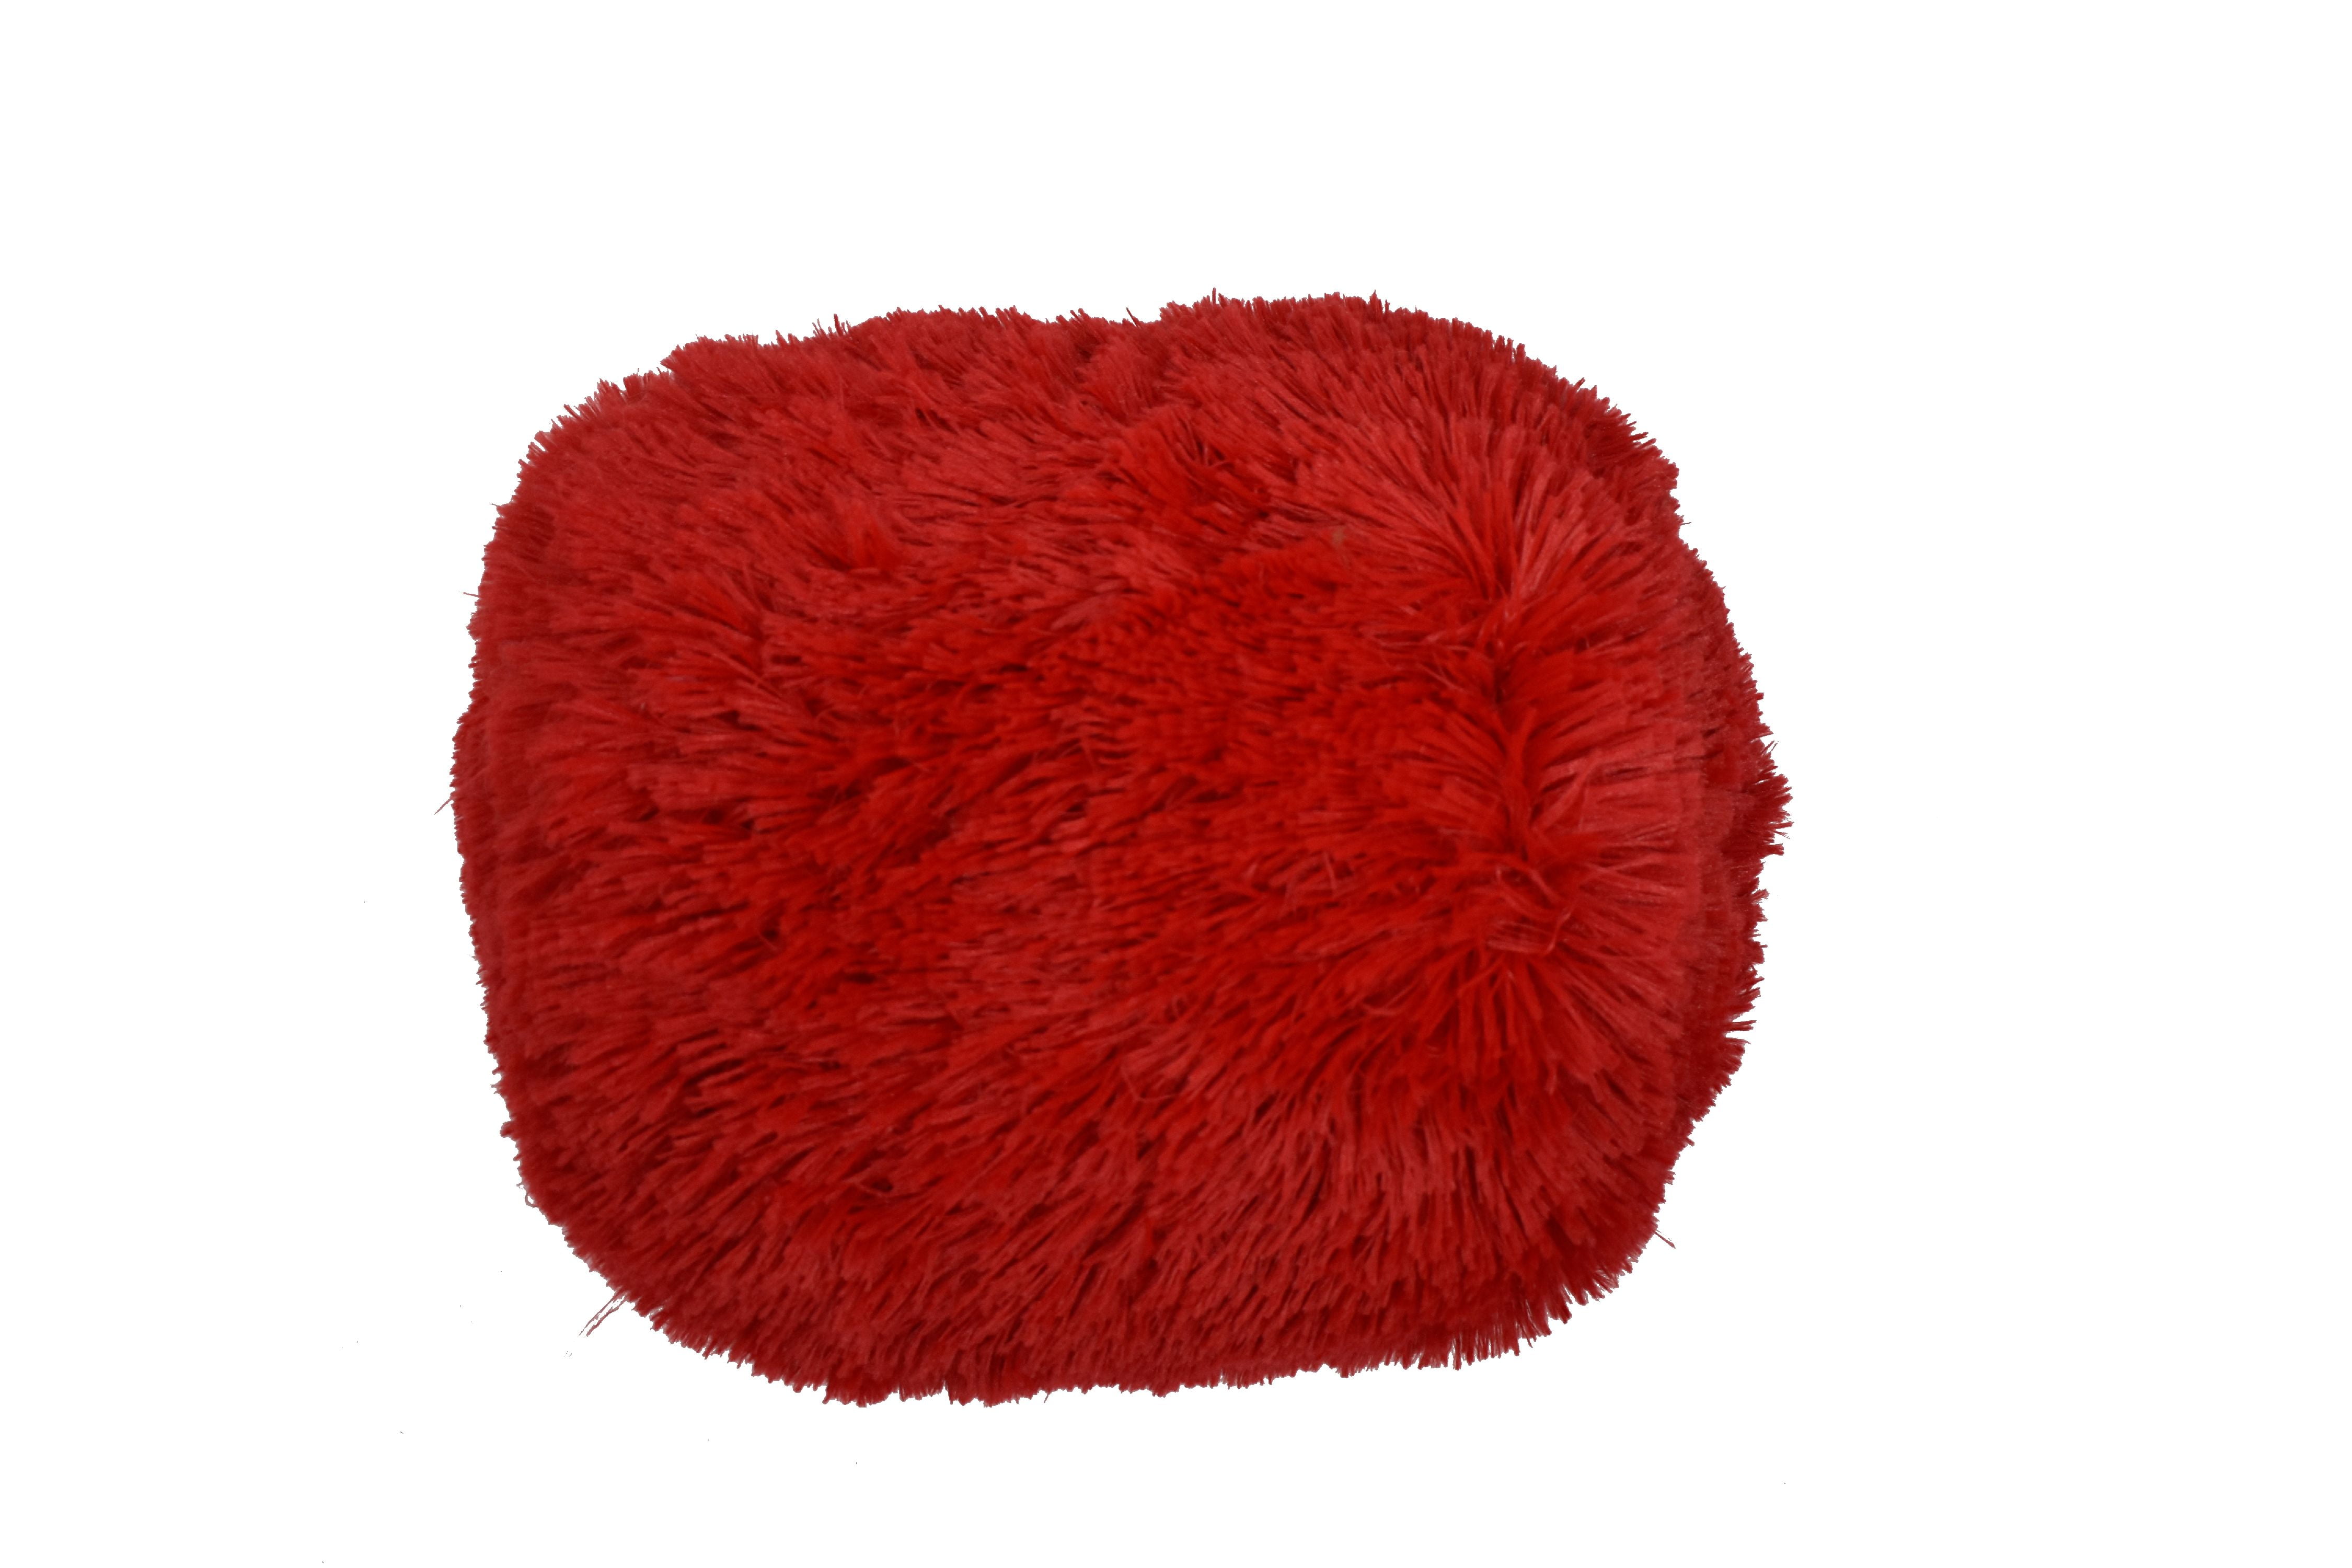 red fuzzy pillows